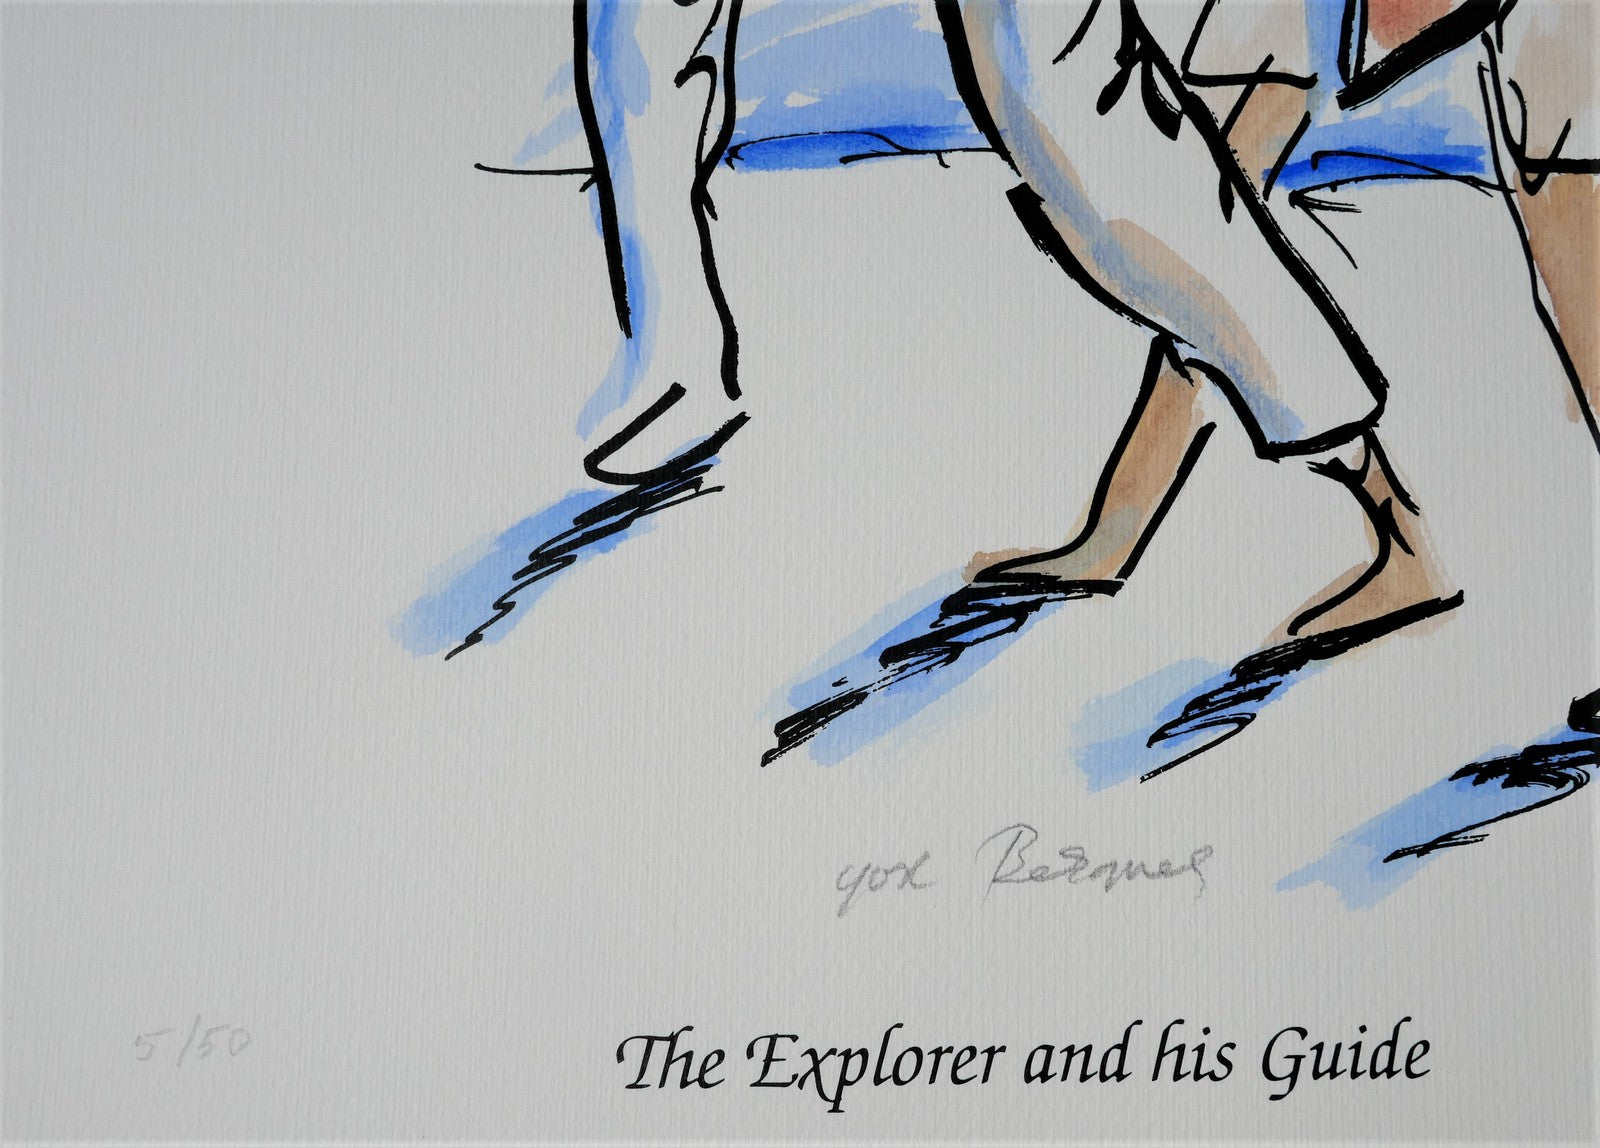 Yosl Bergner 'The Explorer and His Guide, from The Kimberley Album'